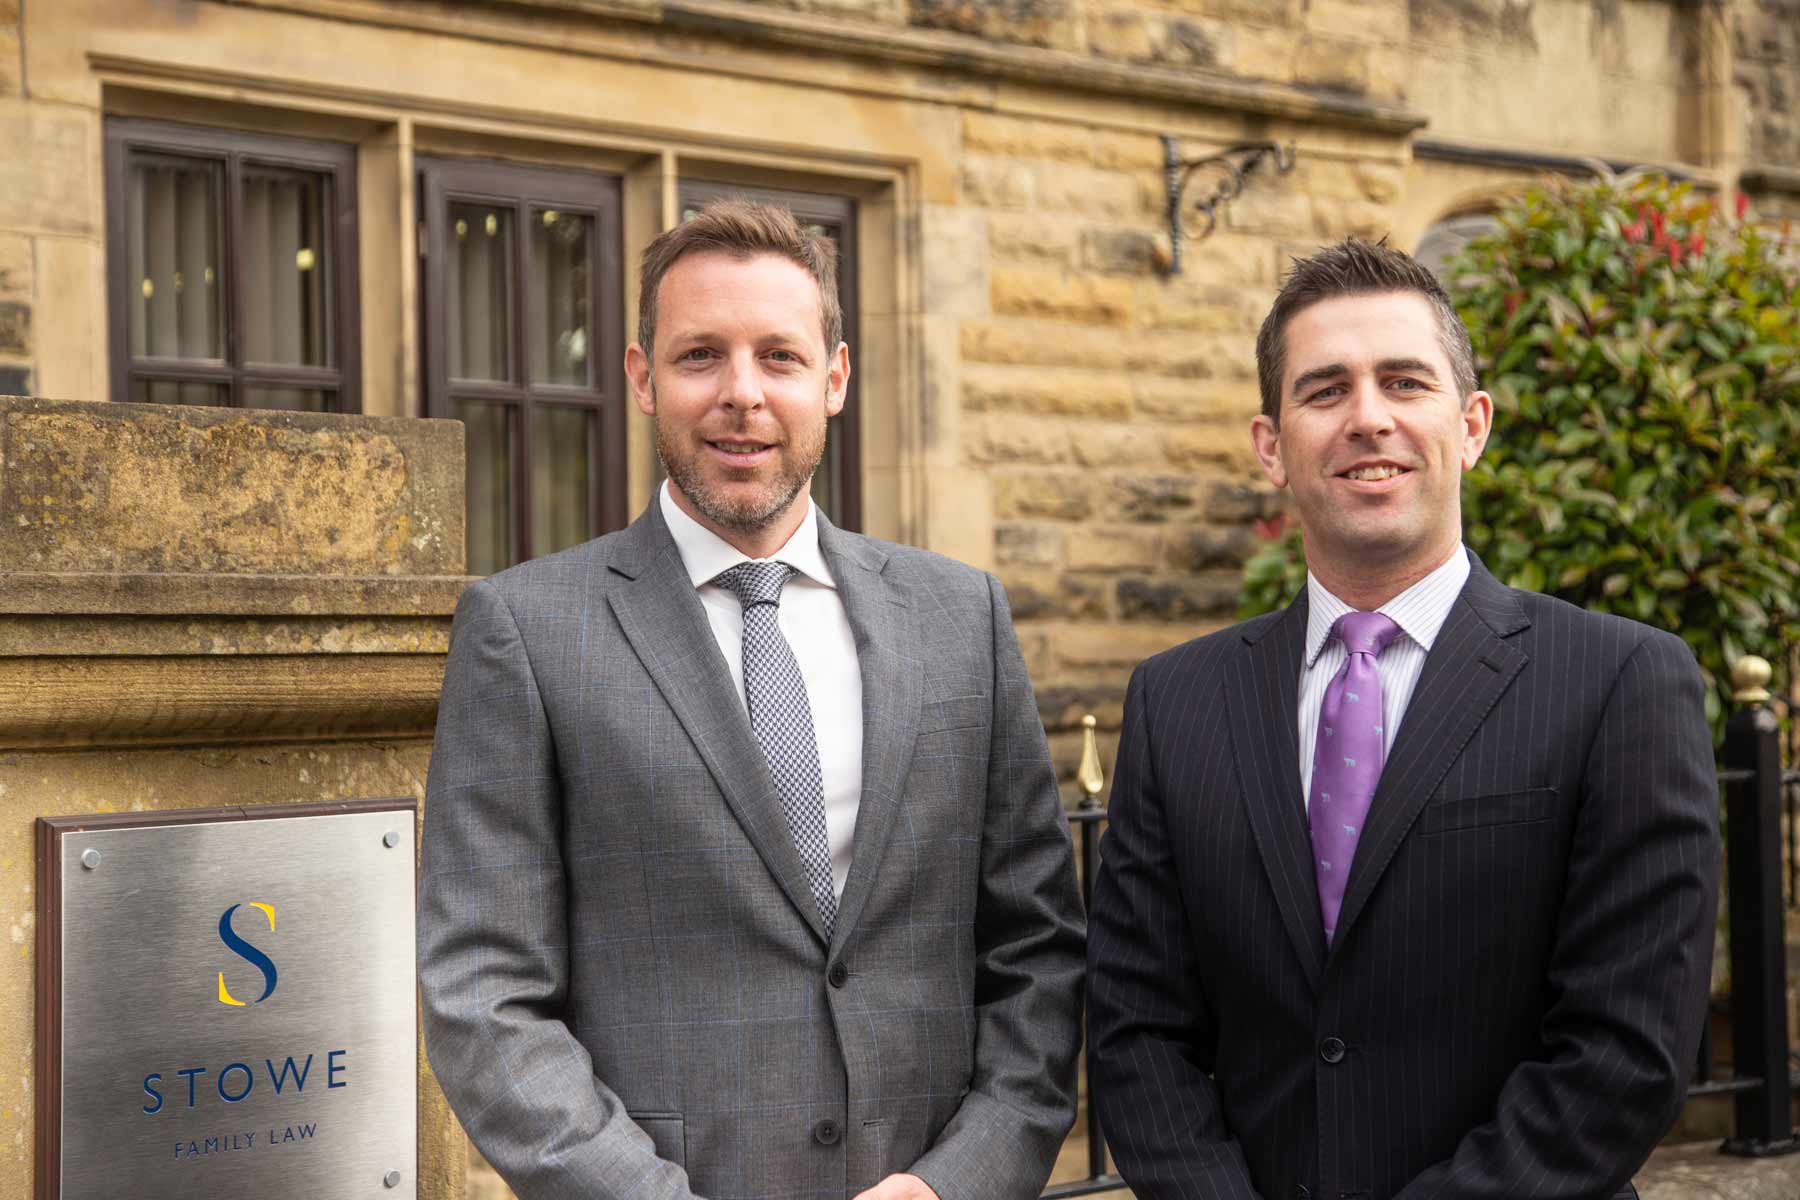 Matthew Miles, Senior Solicitor and David Milburn, Managing Partner of the Stowe Family Law office in Harrogate